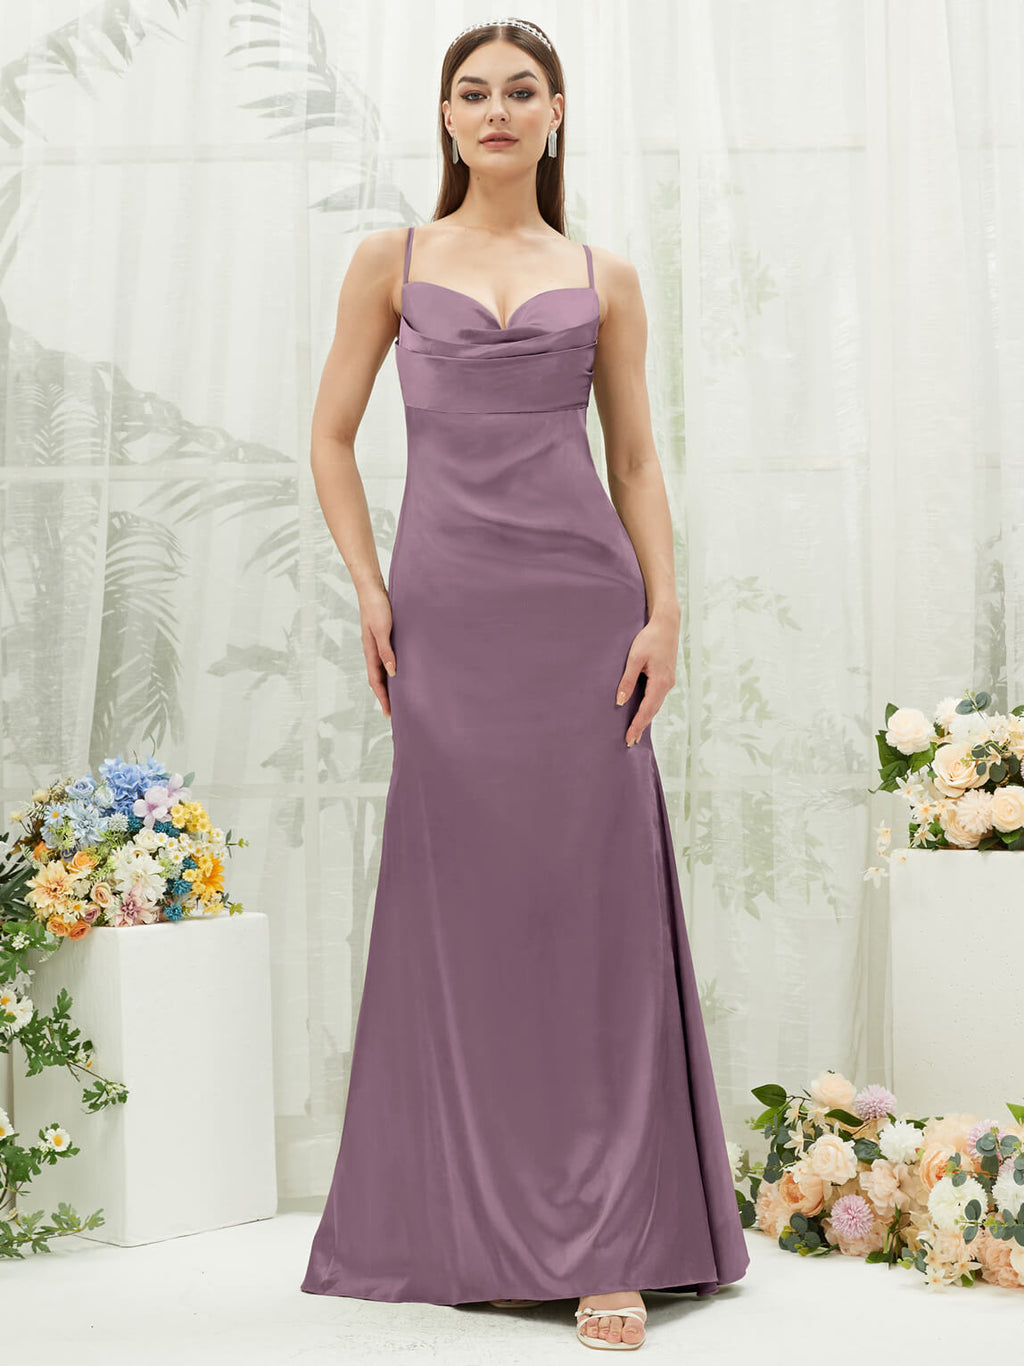 NZ Bridal Pleated Sweetheart Neck Satin Wisteria bridesmaid dresses CA221470 Rory a